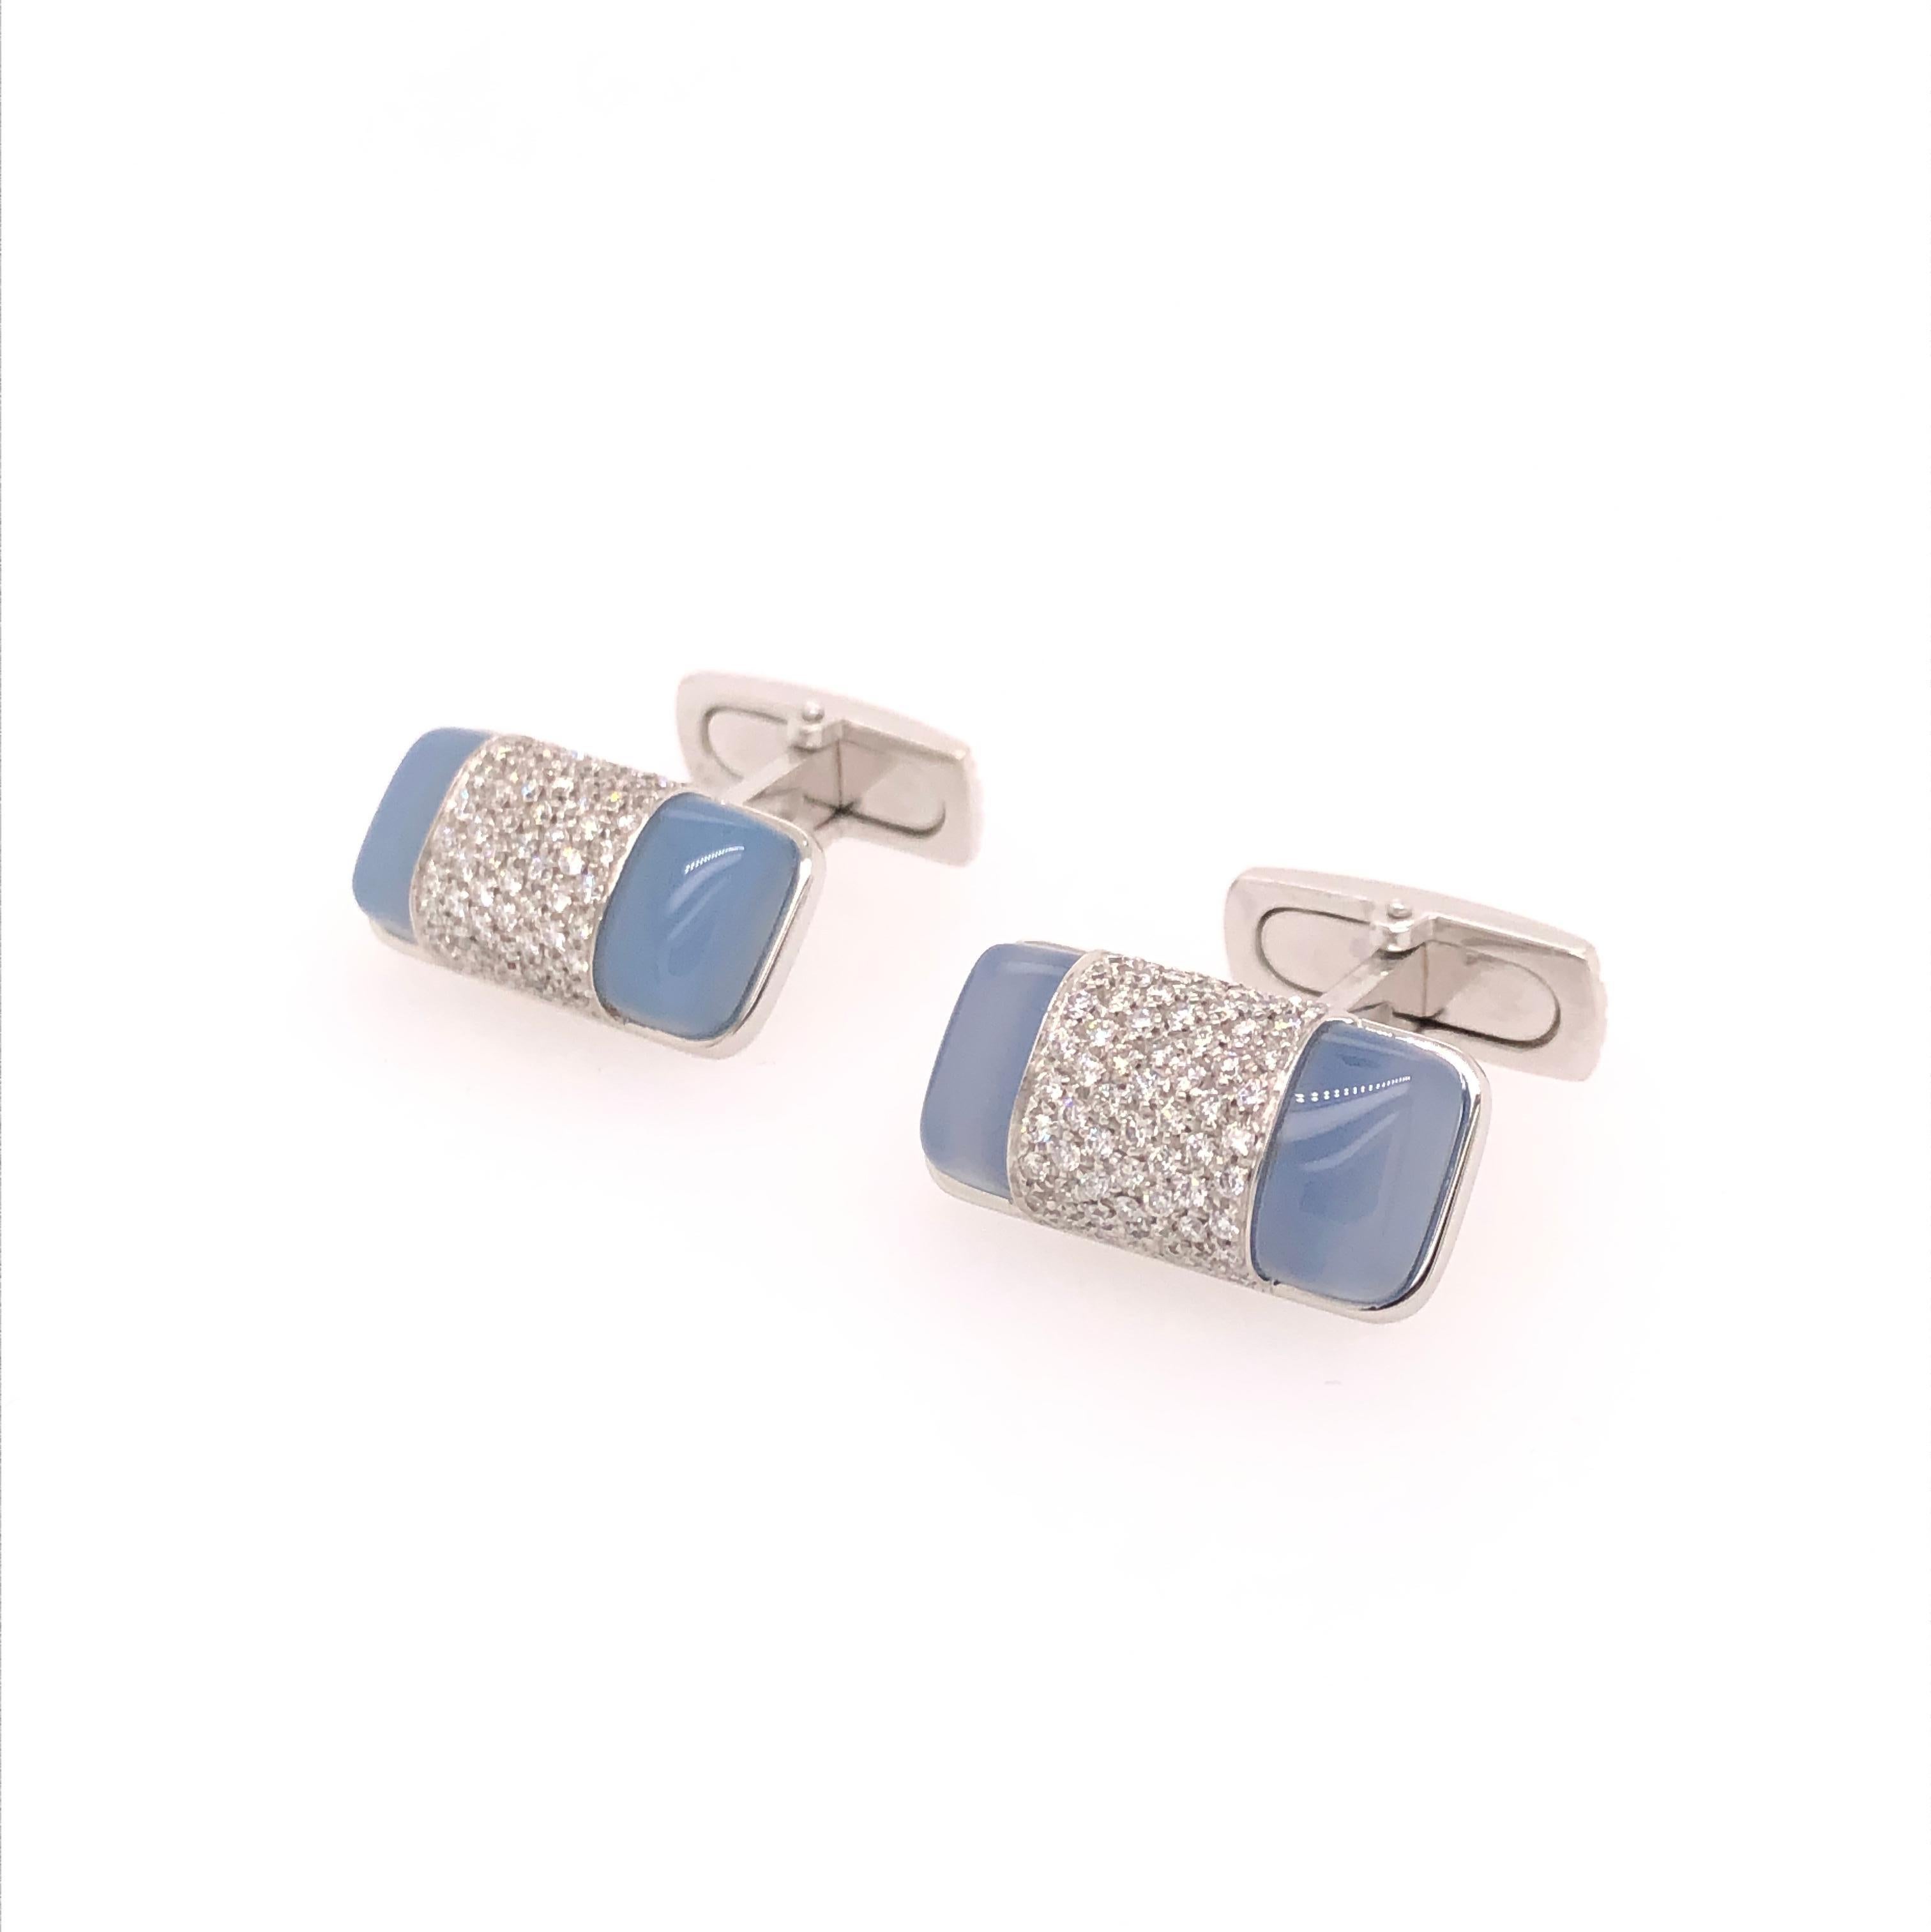 Blue Stone 18K White Gold, Diamond and Chalcedony Cufflinks.  Impeccable design from Orianne Collins.  